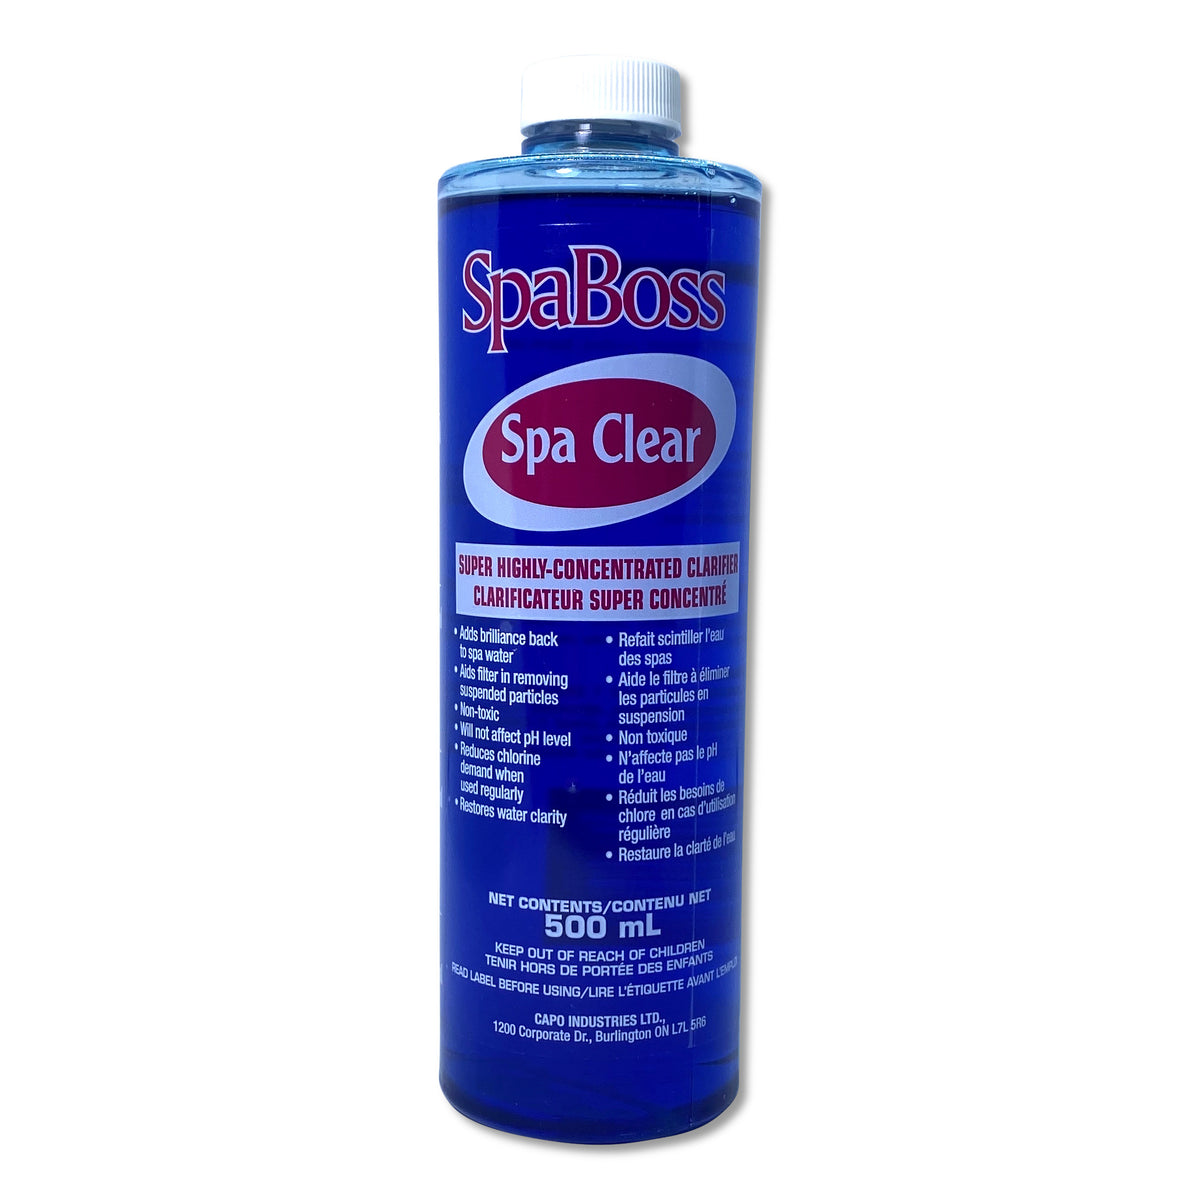 SpaBoss Spa Clear (Concentrated Clarifier)500 ml